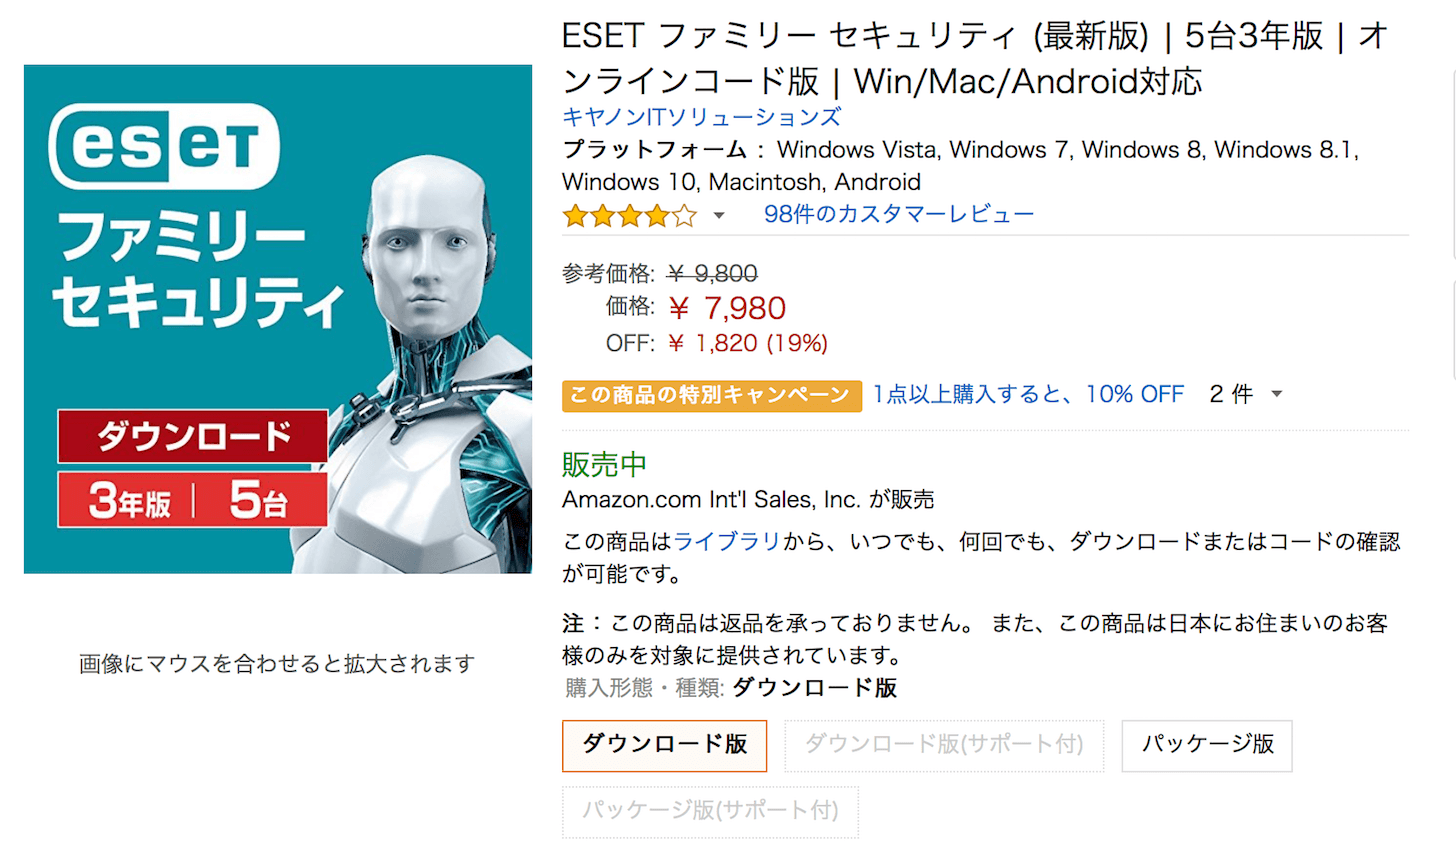 ESET security sale purchase 2